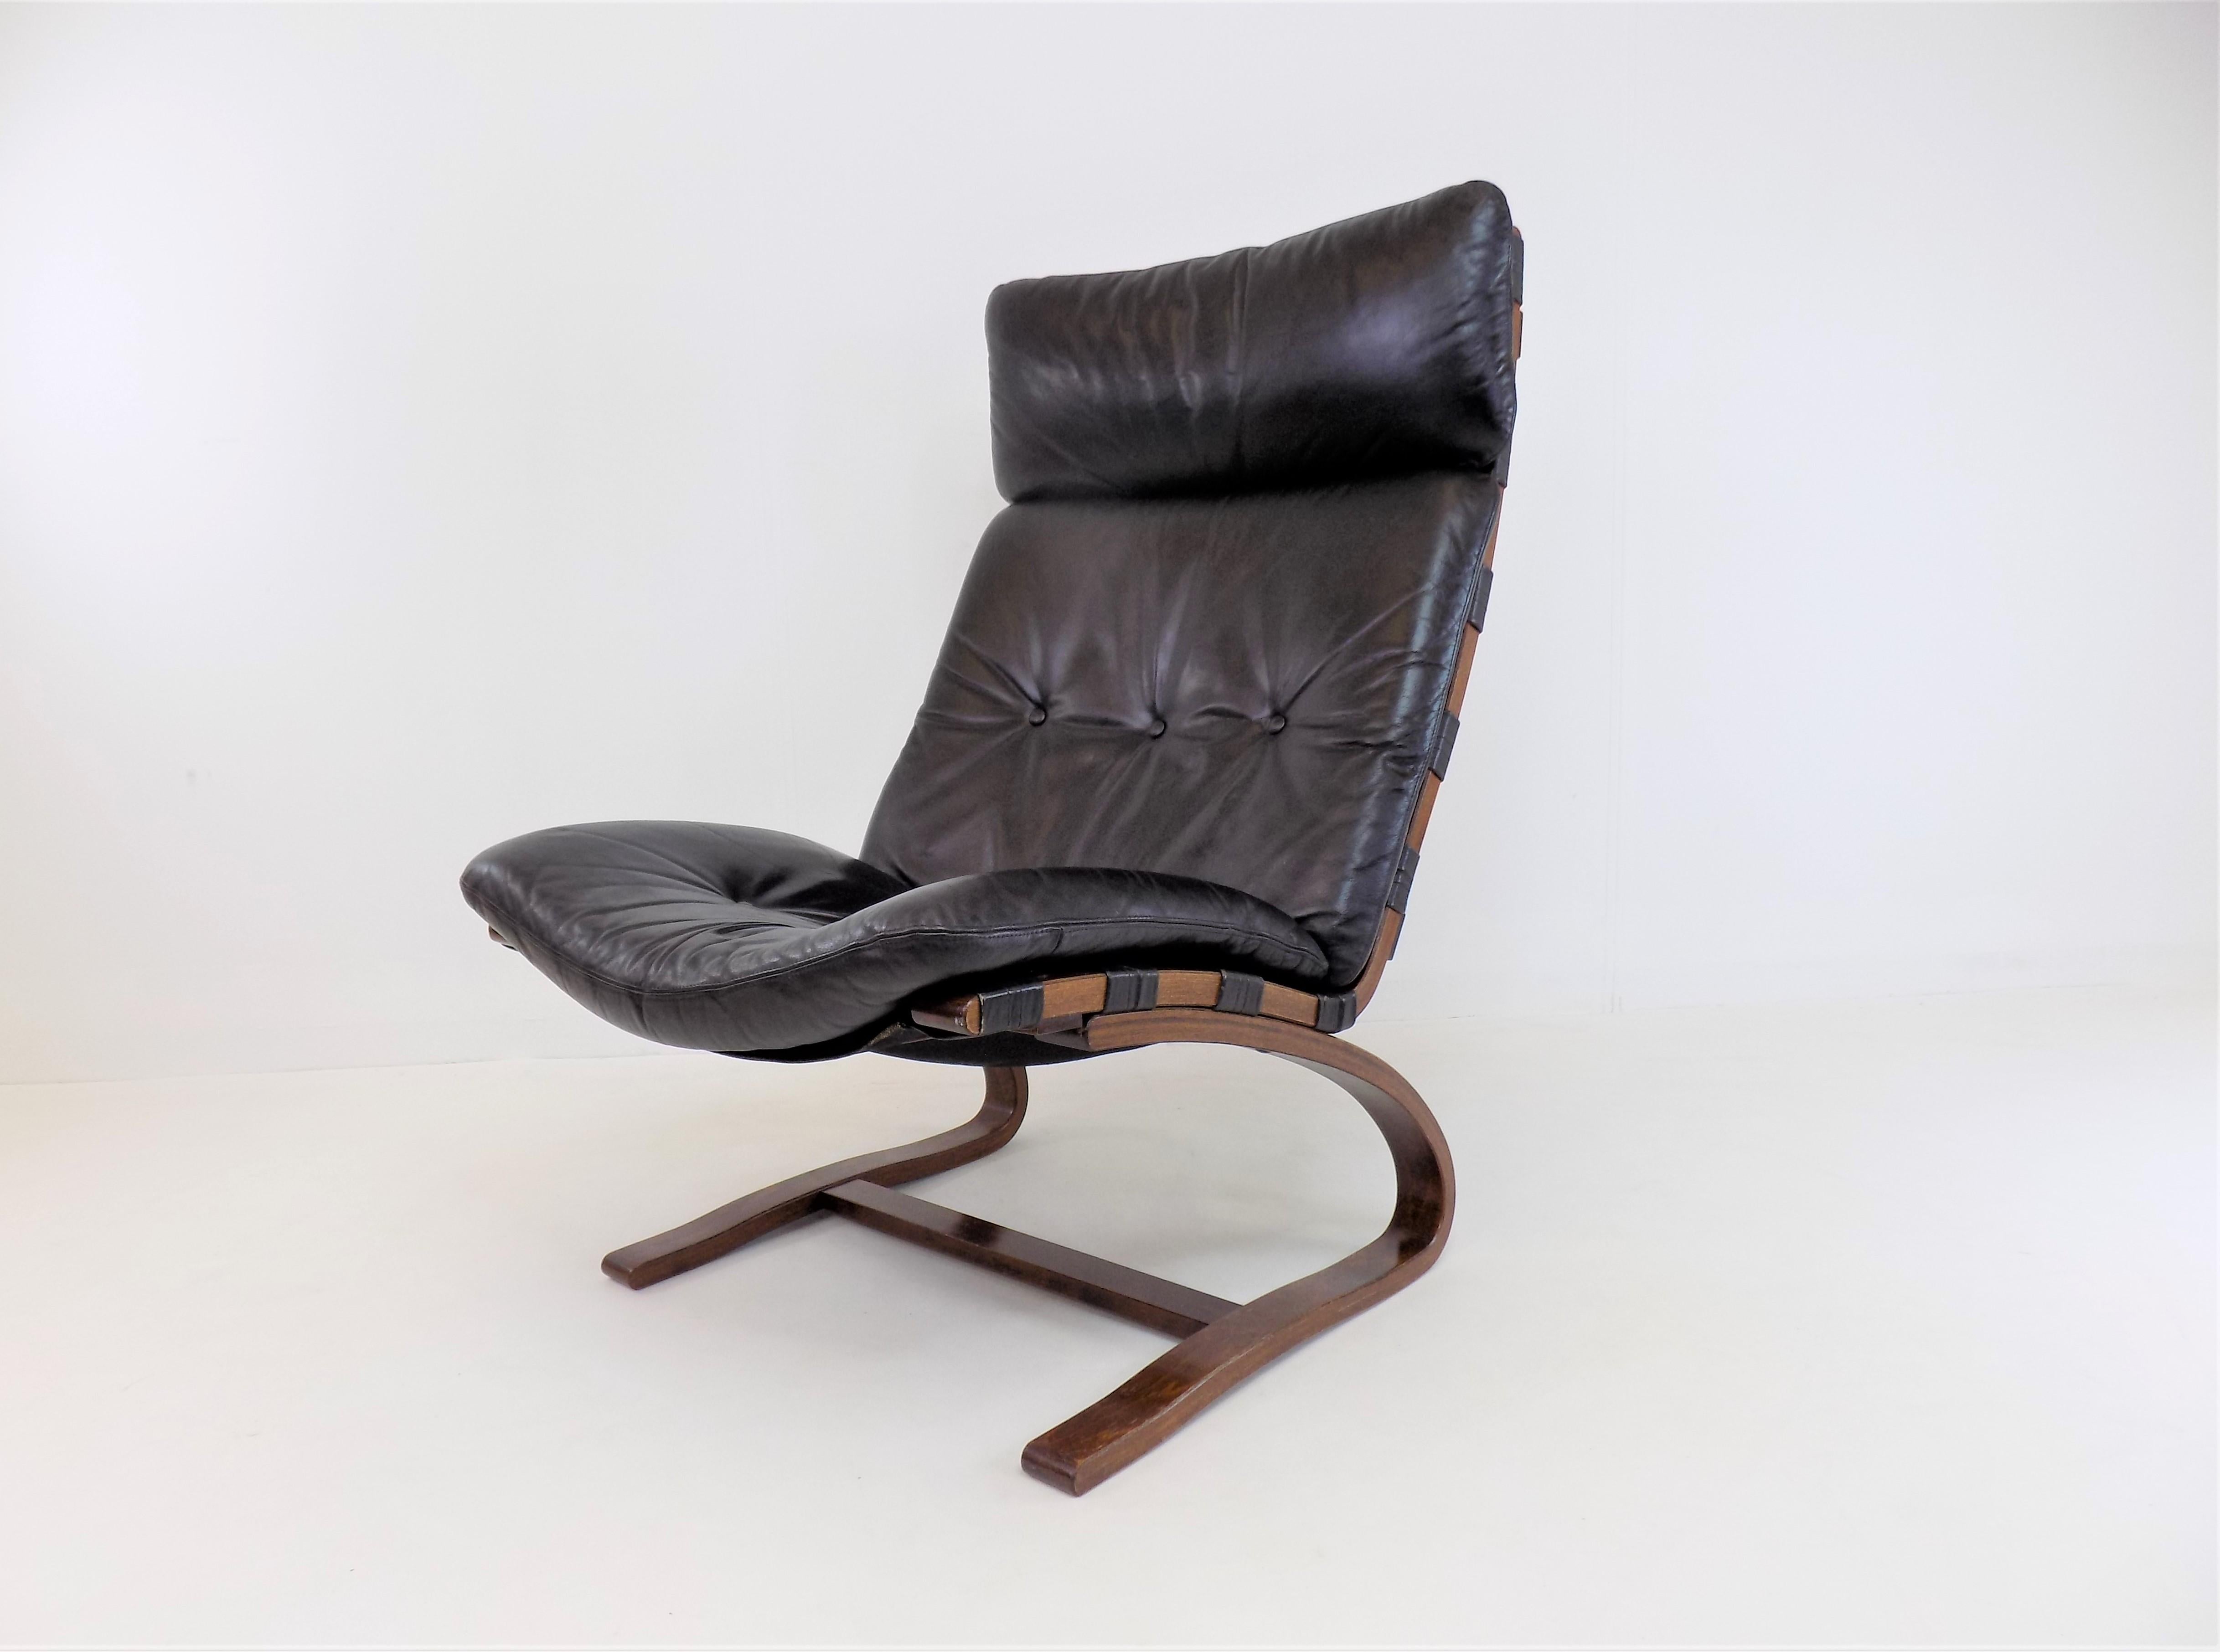 This kengu comes in black leather with a teak wooden frame. The leather is in perfect condition with minimal signs of wear. The wooden frame shows slight signs of wear, especially on the back.  The armchair is the model with a high backrest. Due to